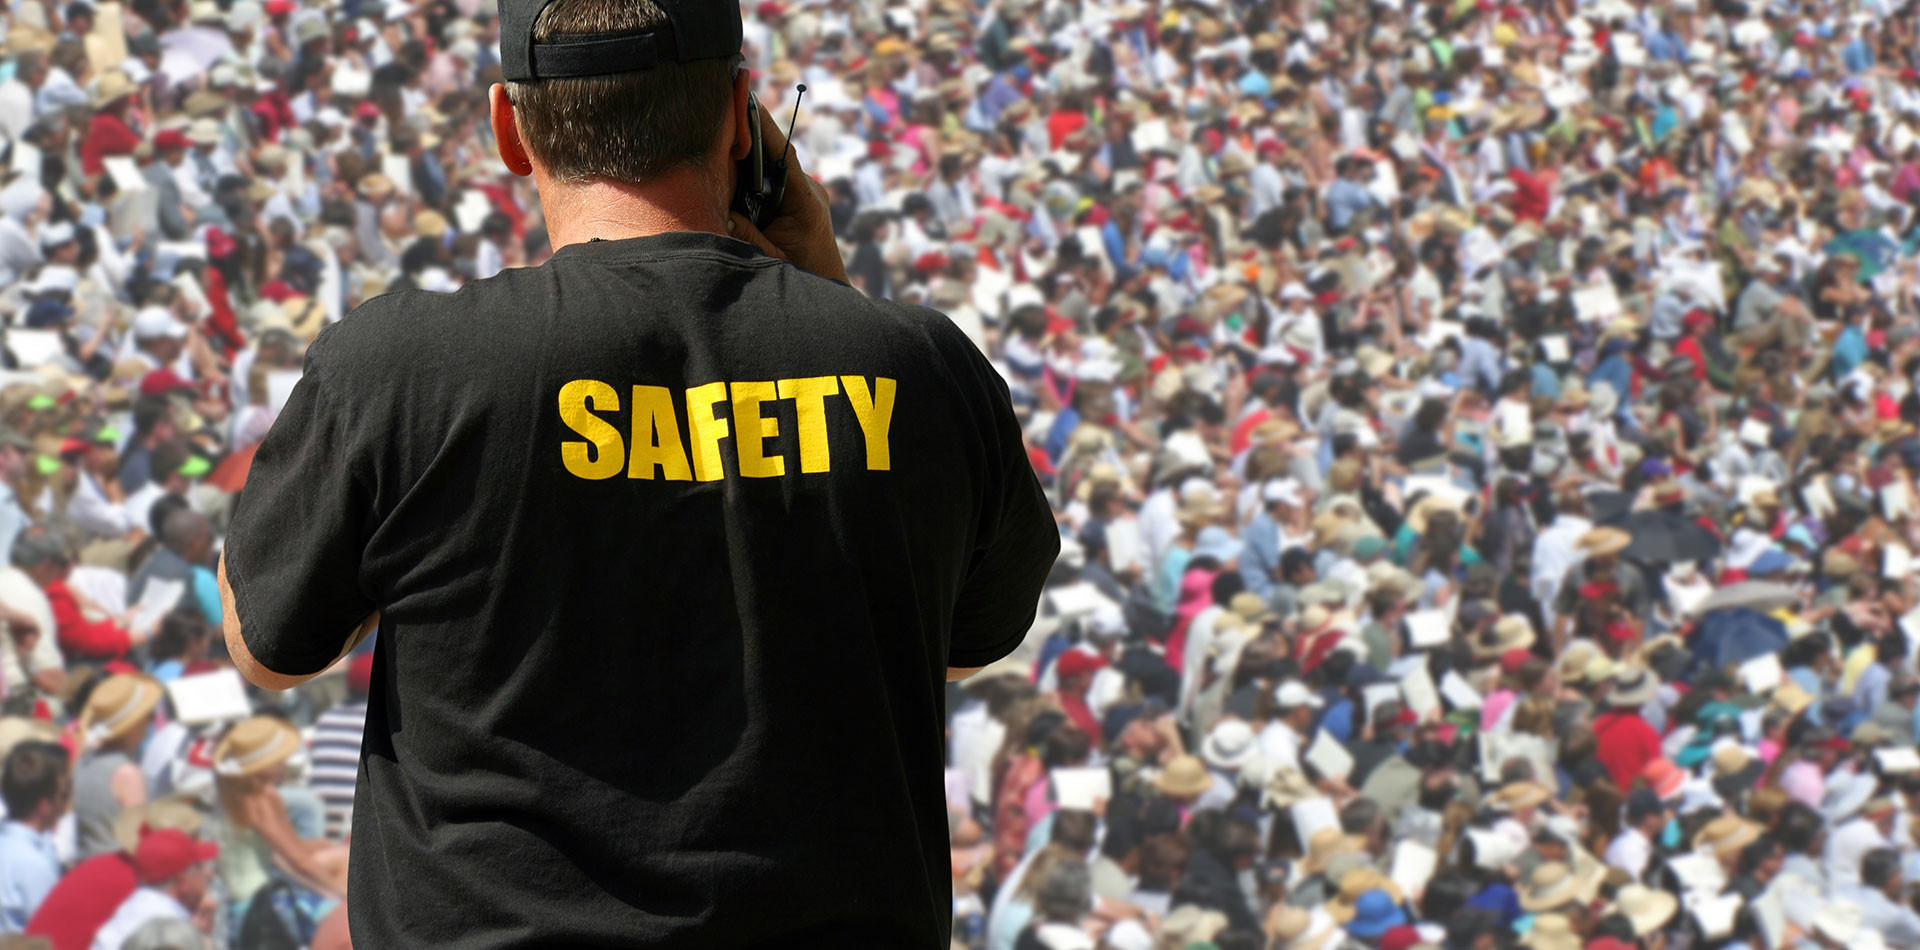 Crowd Safety. England event Safety. Crowd control